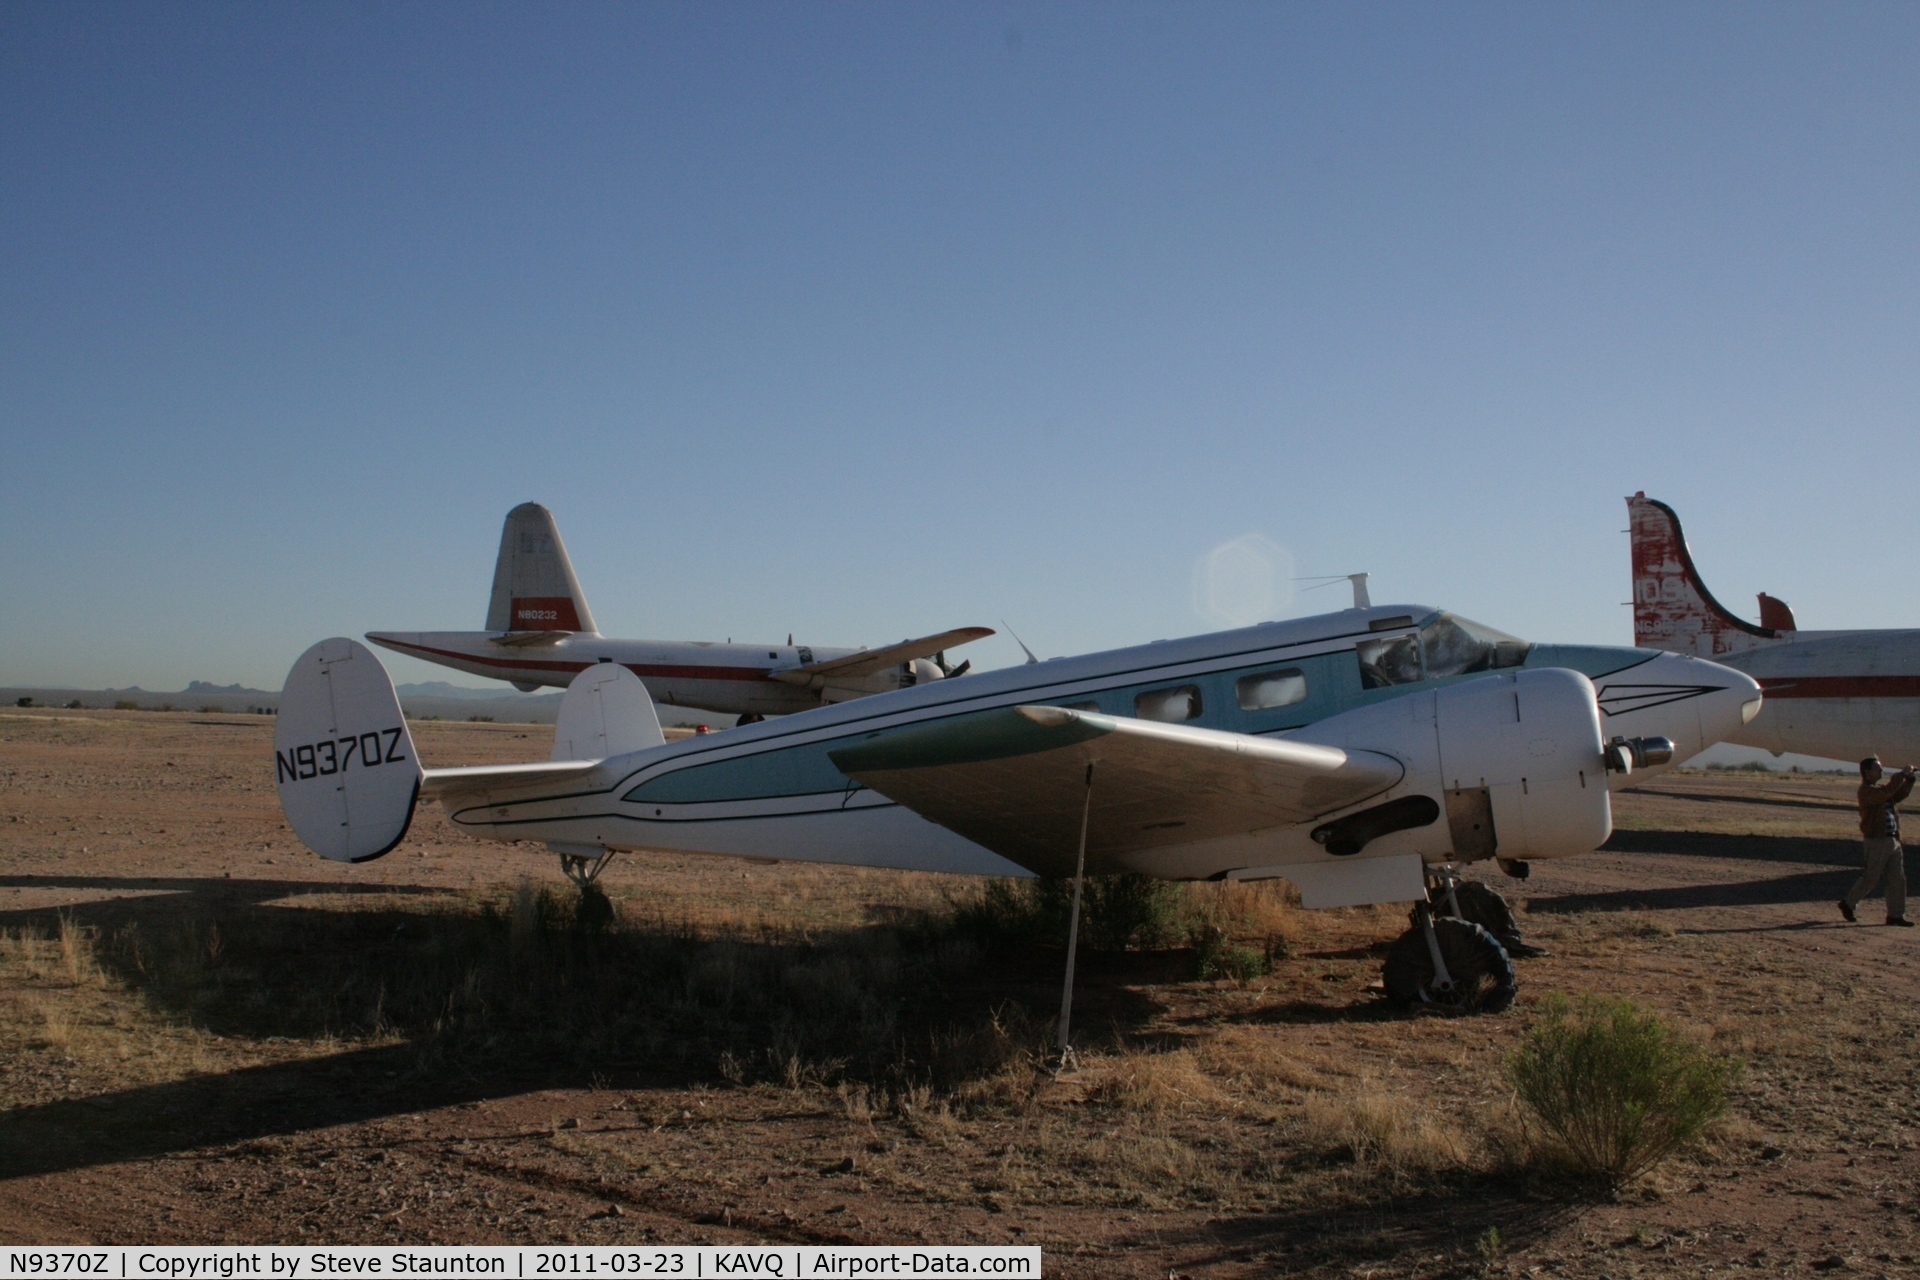 N9370Z, 1952 Beech C-45H Expeditor C/N AF-780 (52-10850), Taken at Avra Valley Airport, in March 2011 whilst on an Aeroprint Aviation tour